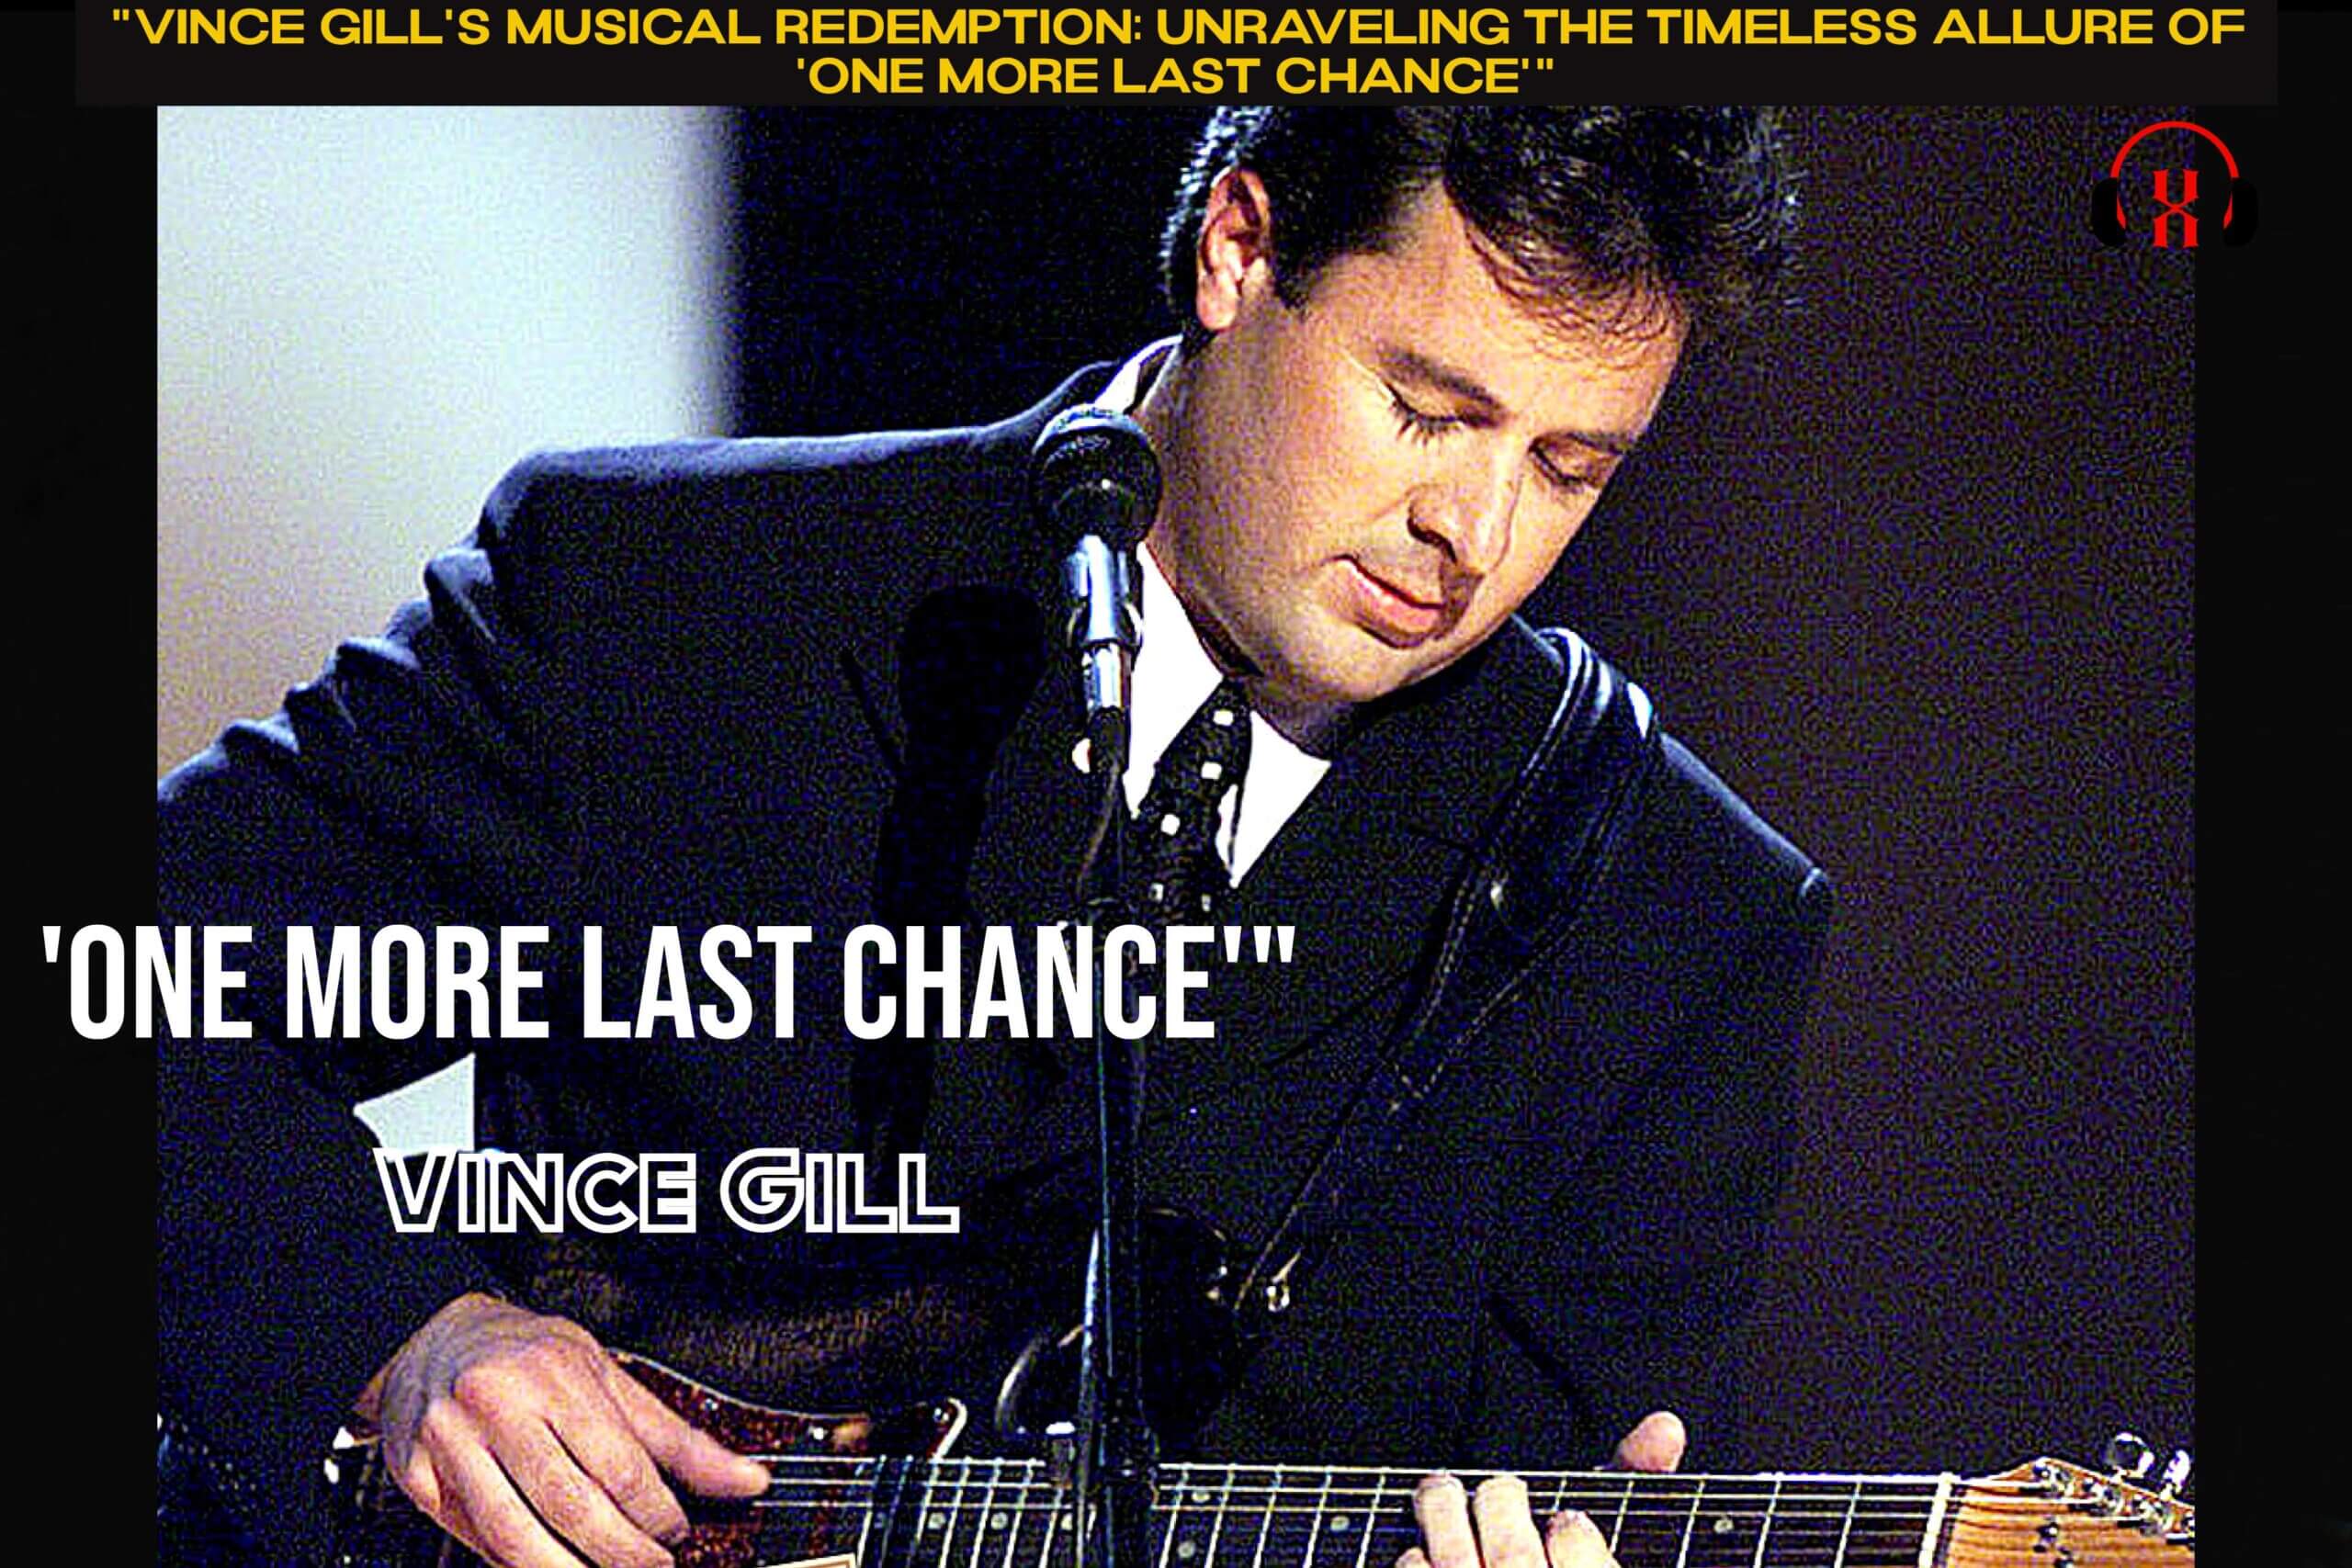 Vince Gill's Musical Redemption Unraveling the Timeless Allure of 'One More Last Chance'